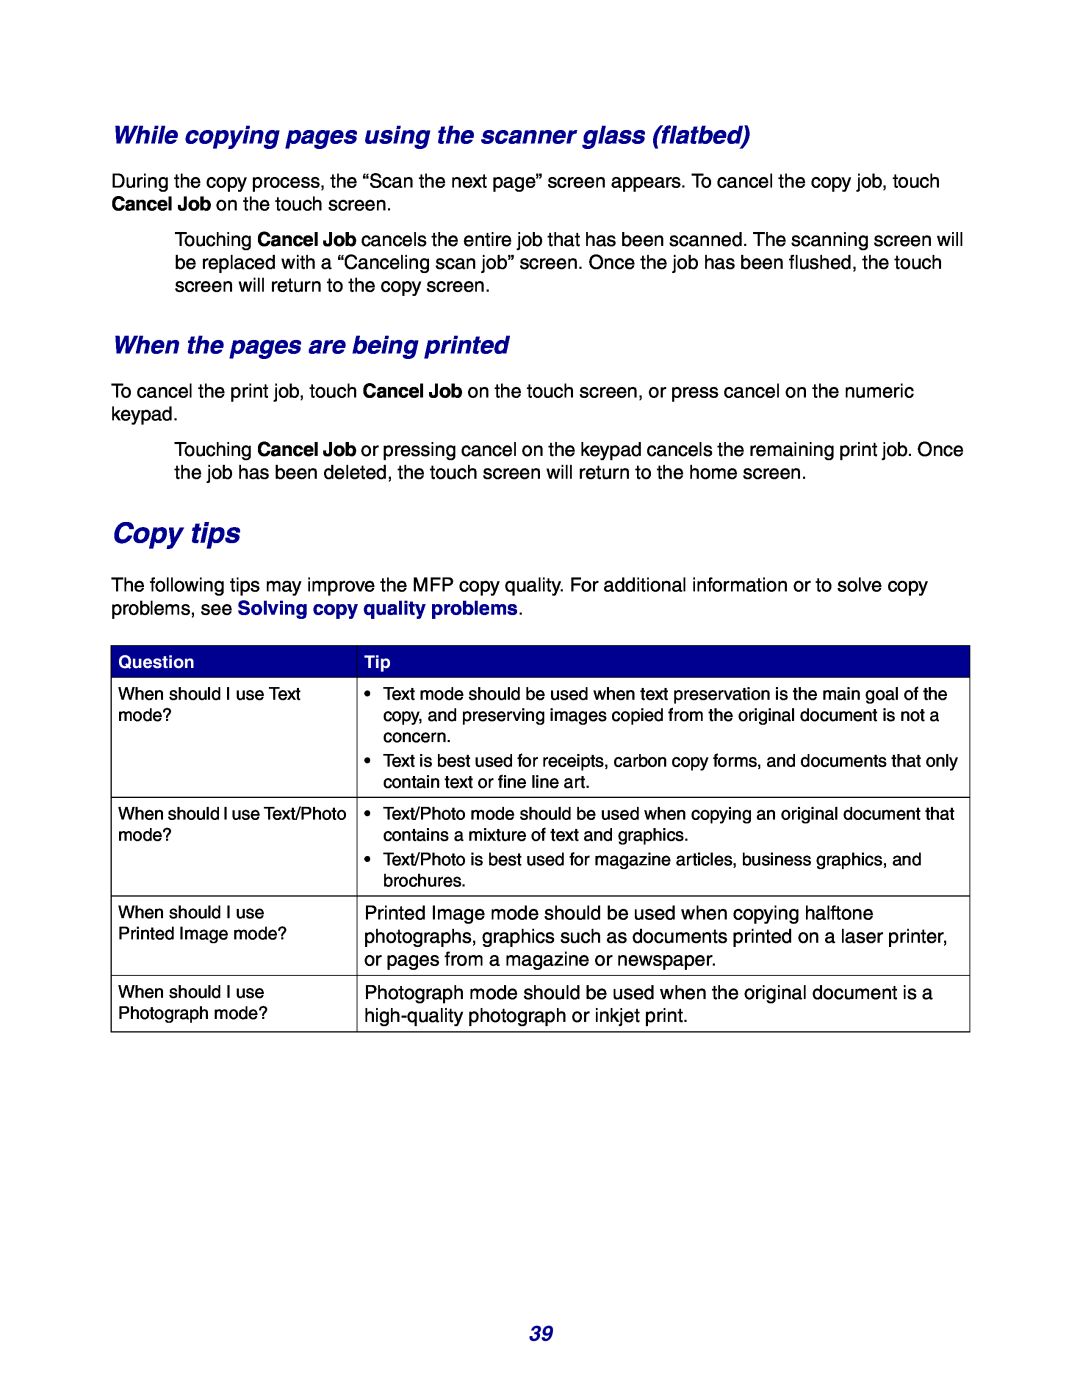 Lexmark X642e manual Copy tips, While copying pages using the scanner glass flatbed, When the pages are being printed 